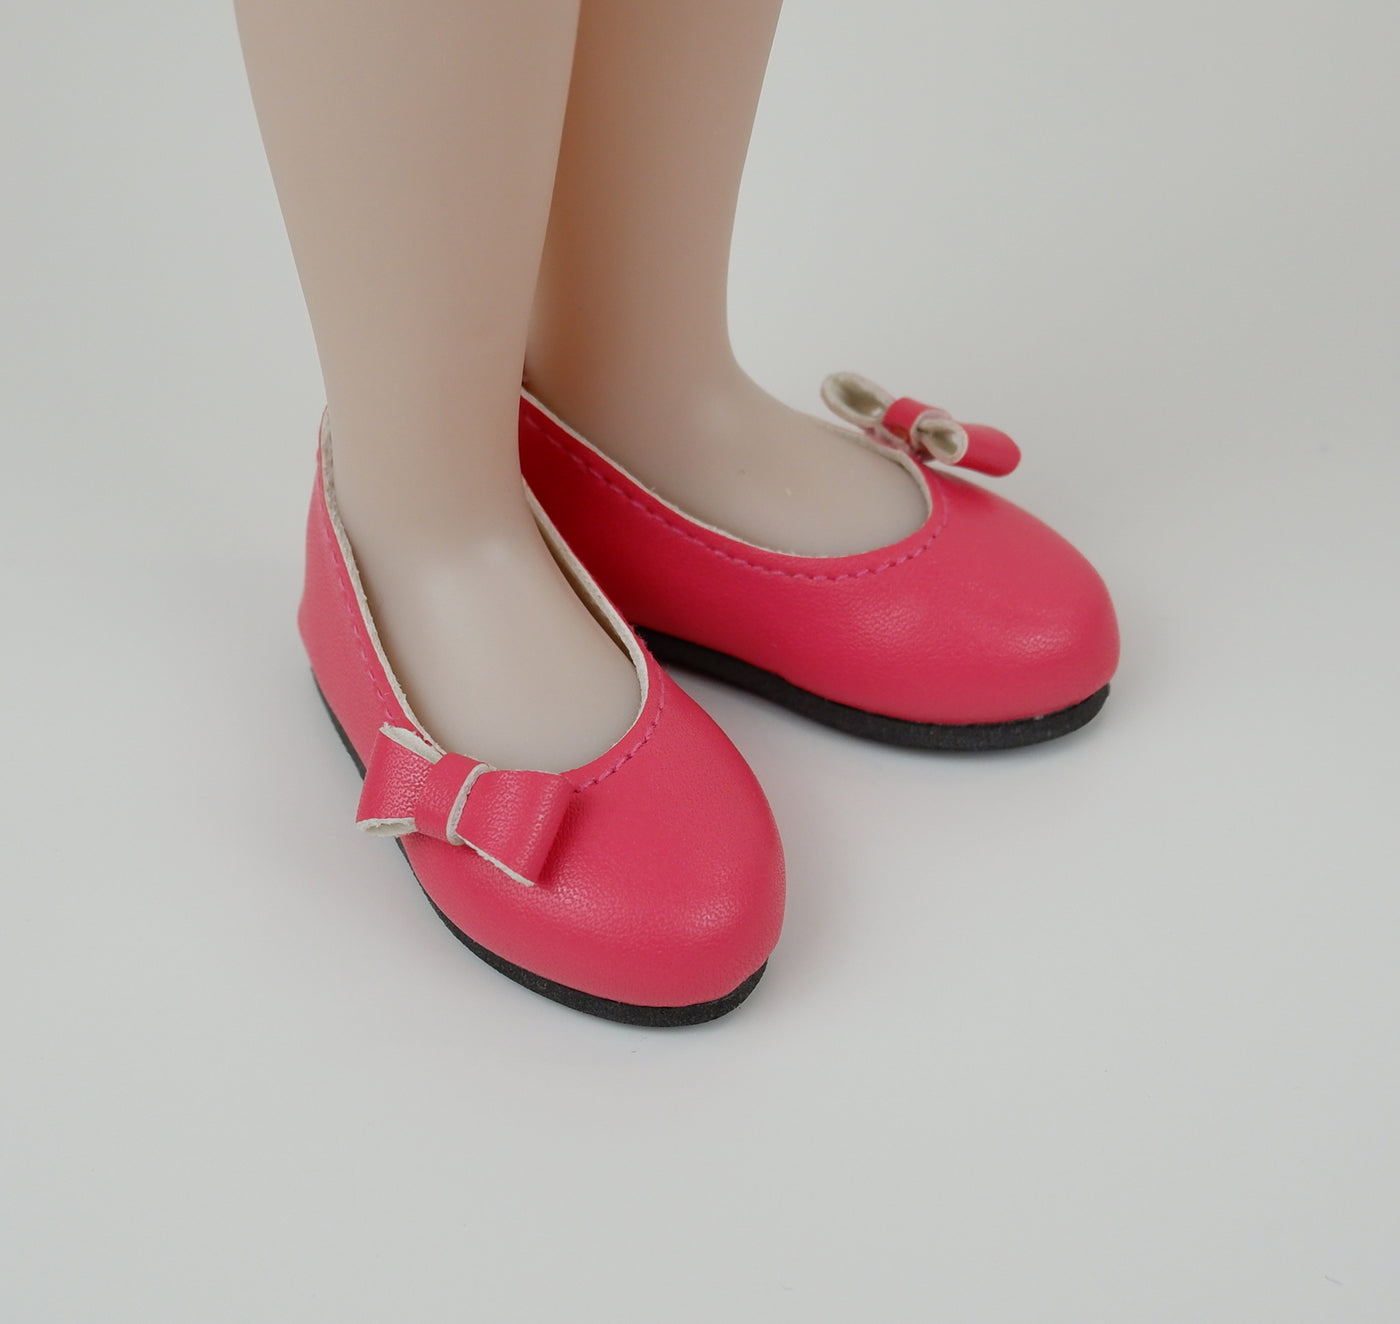 FACTORY SECONDS Bow Toe Ballet Flats - Punch Pink